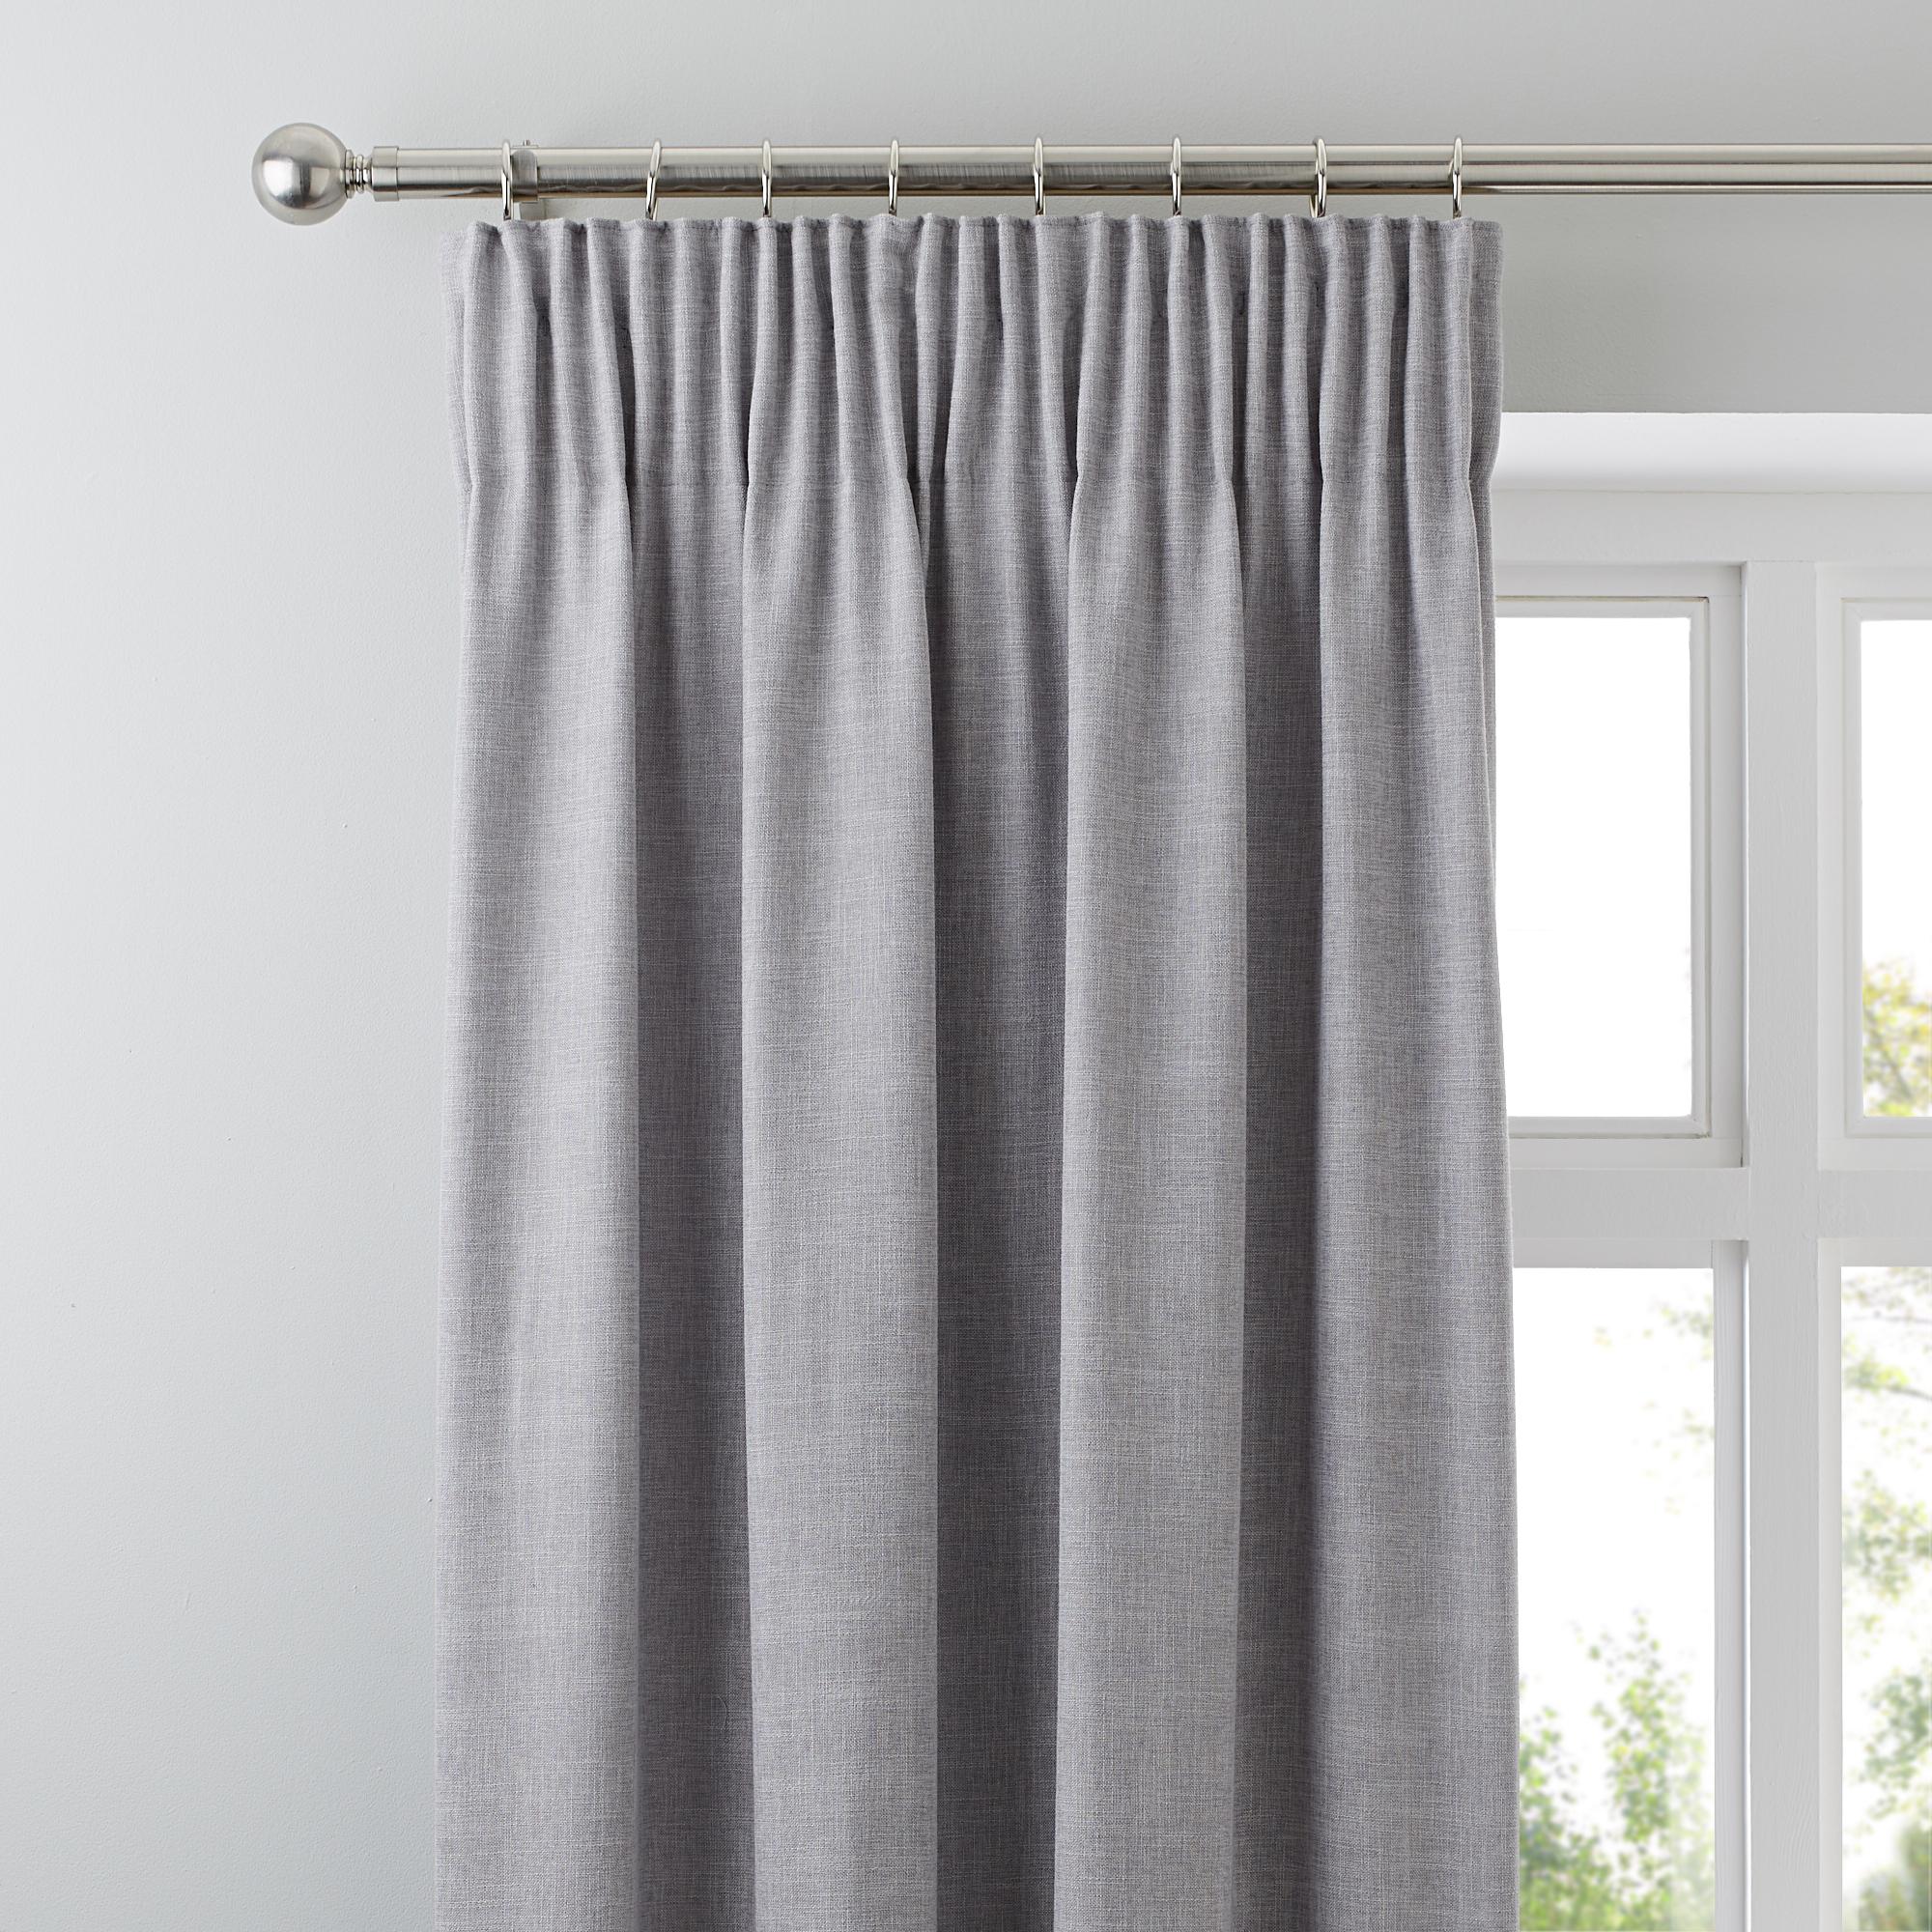 Bombastic variety of Pencil pleat  curtains